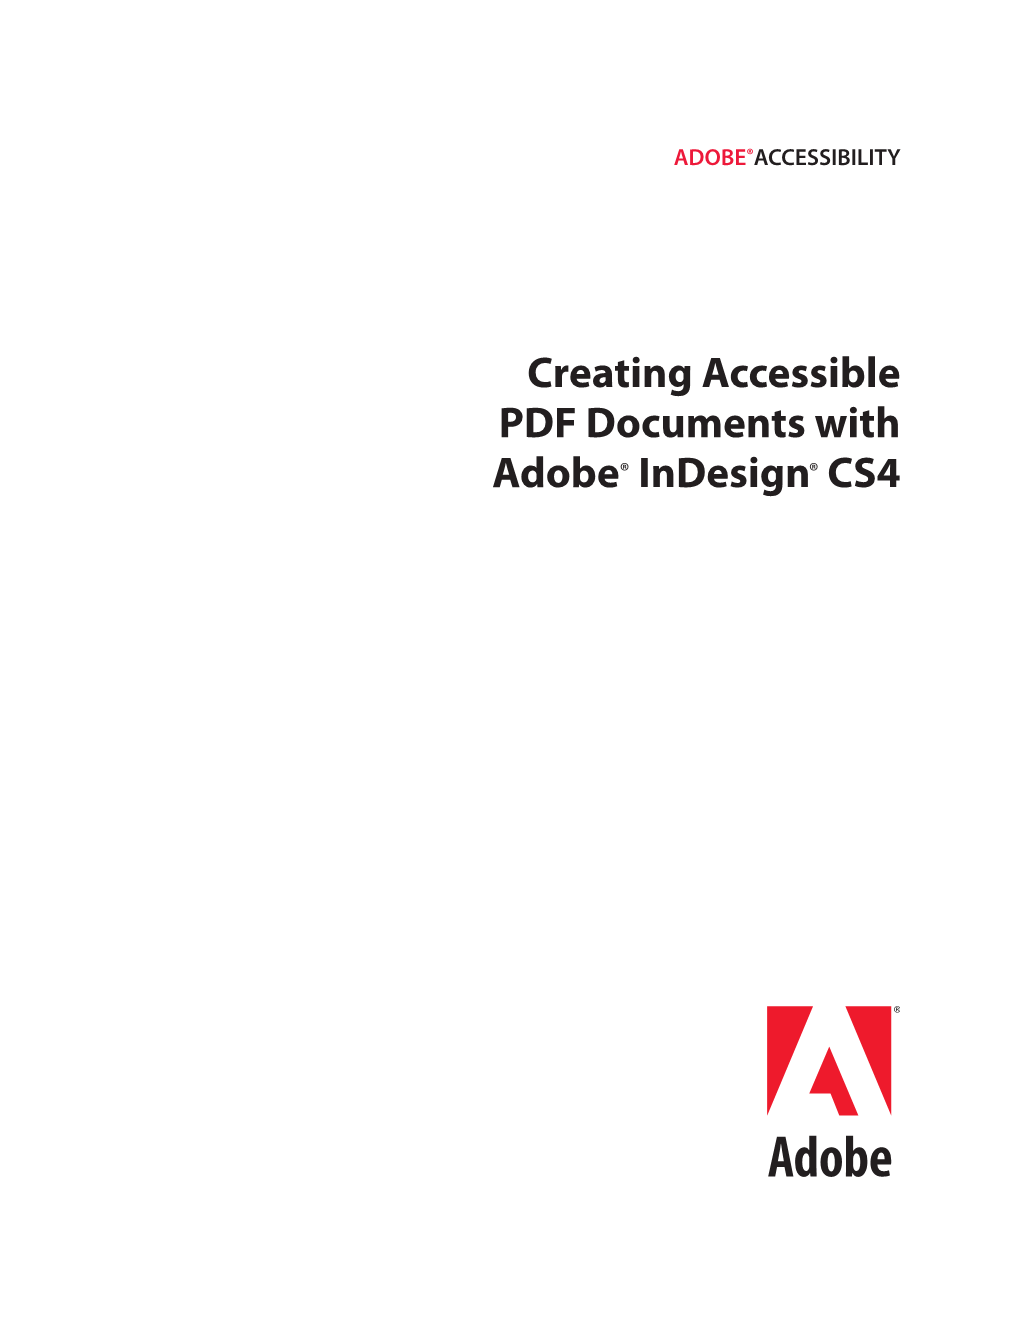 Creating Accessible PDF Documents with Adobe Indesign